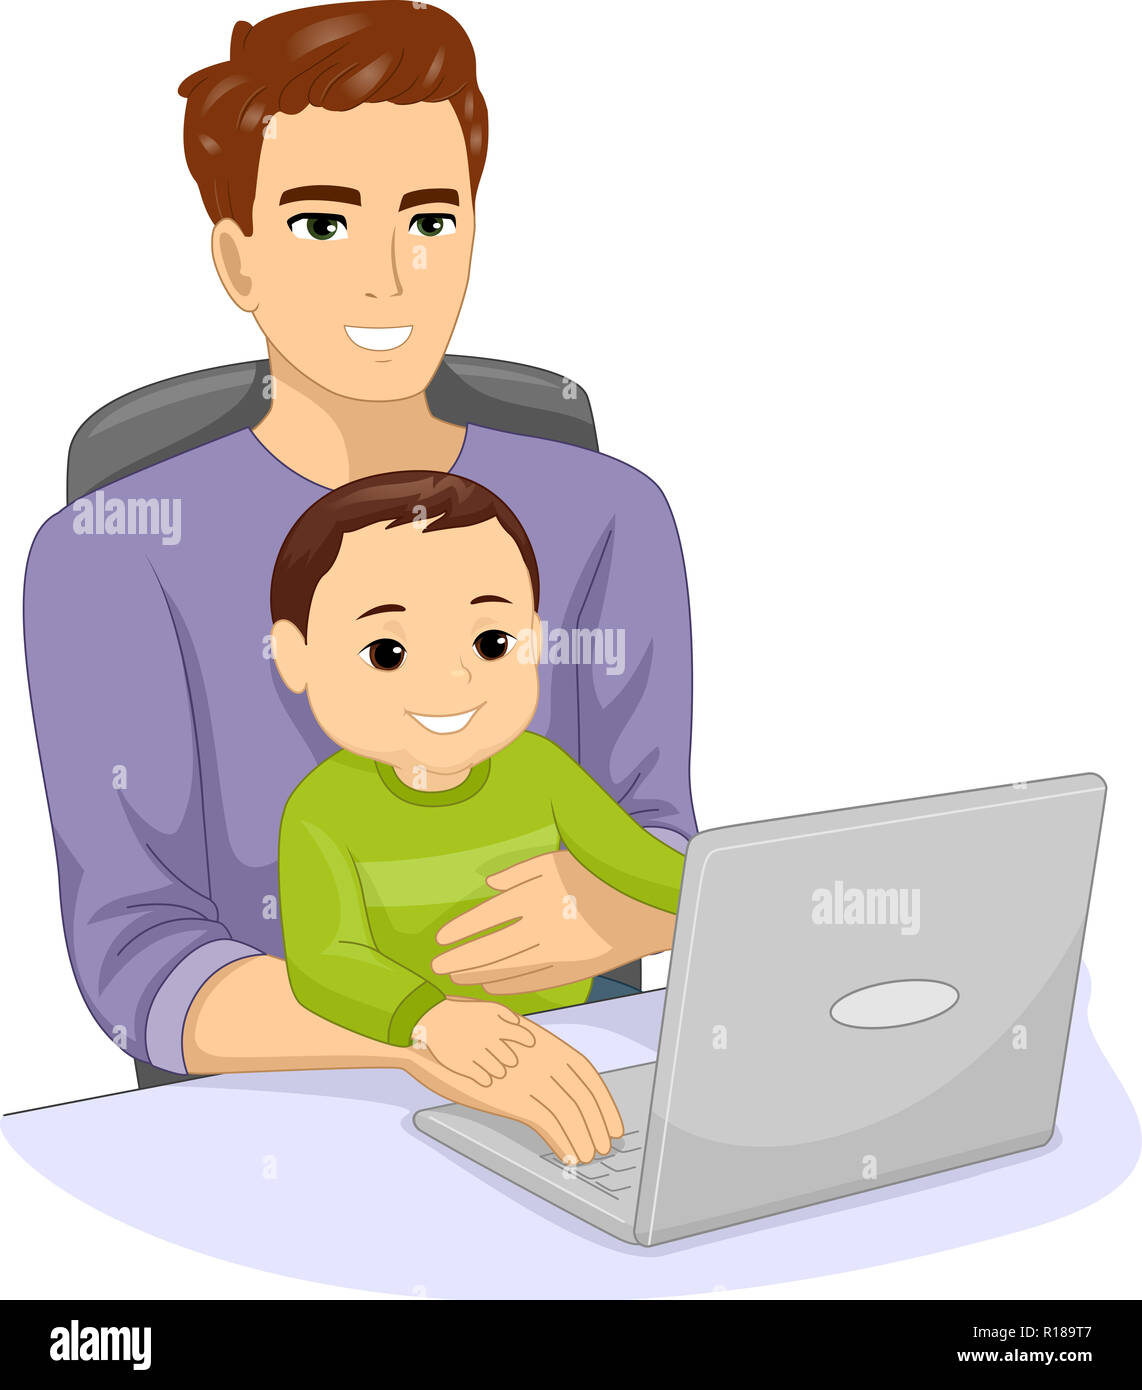 clipart father working